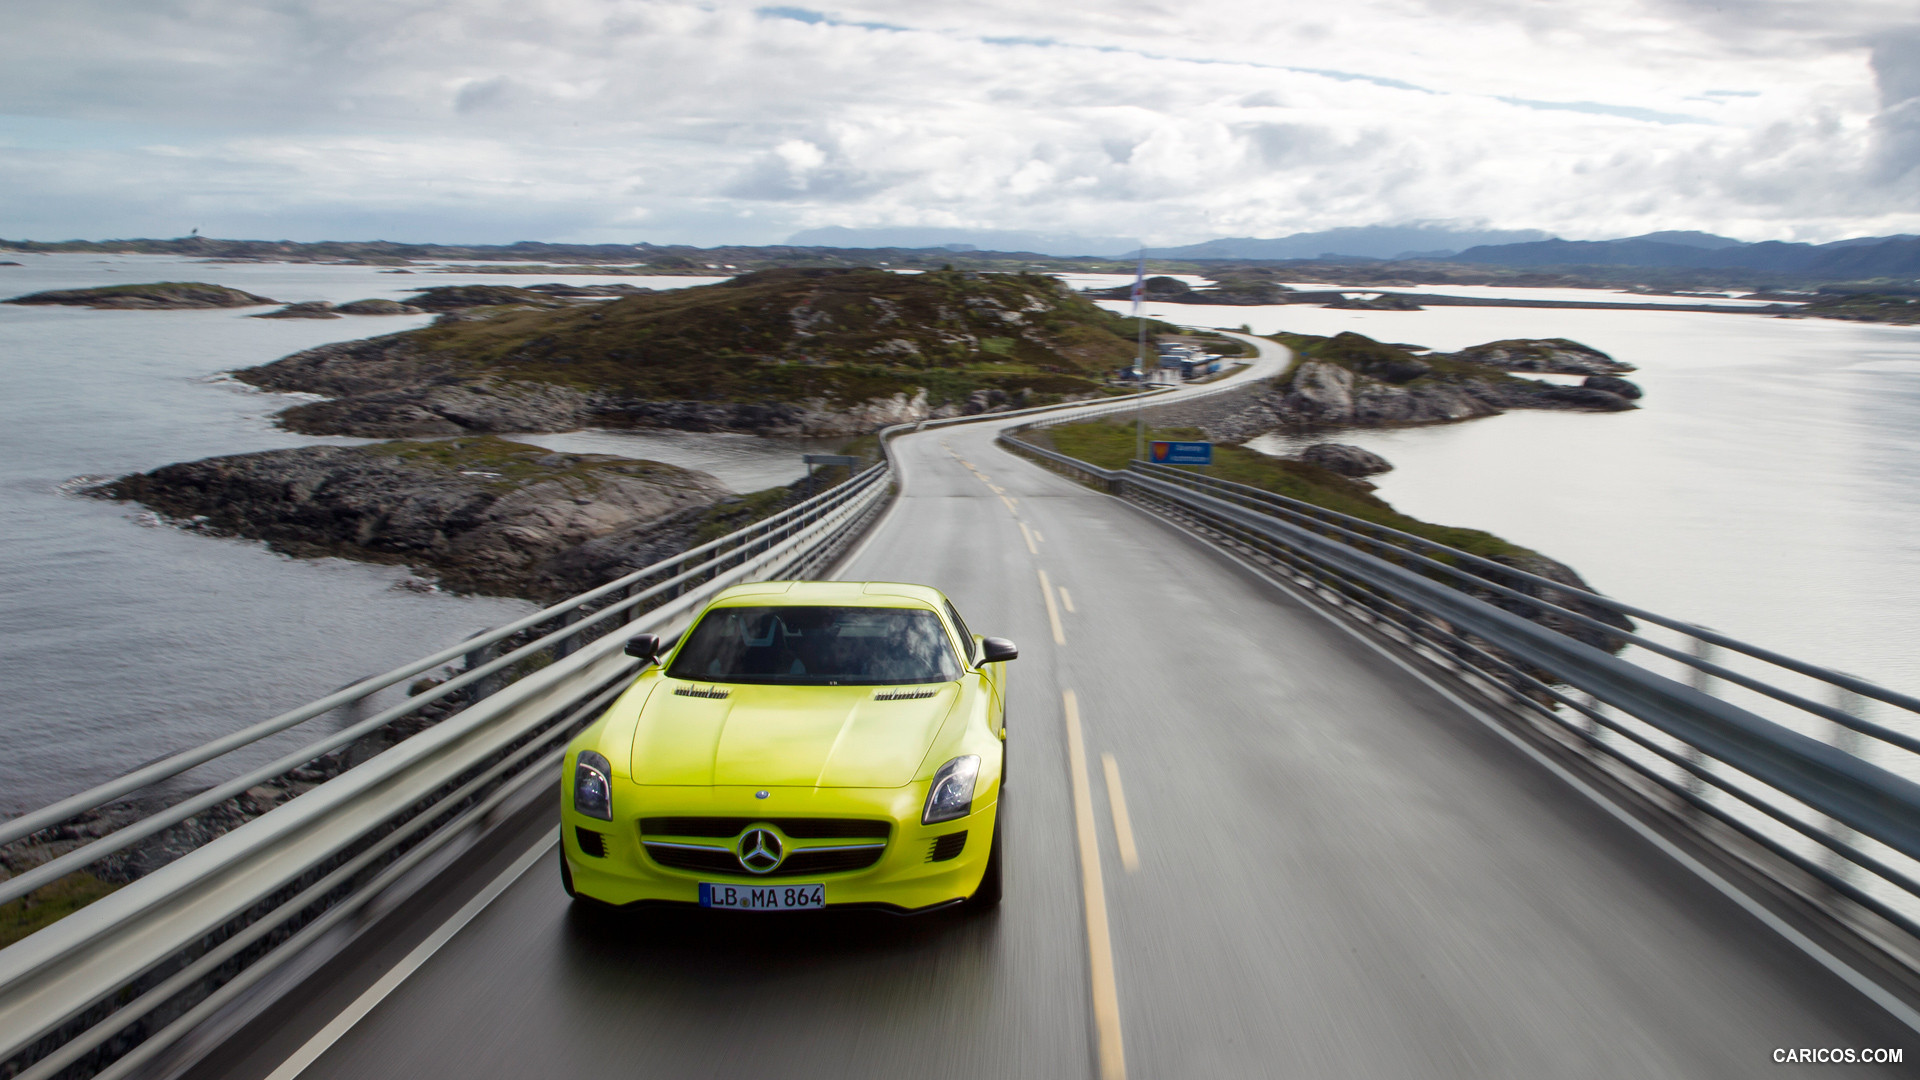 Mercedes-Benz SLS AMG E-CELL Concept  - Front, #25 of 60